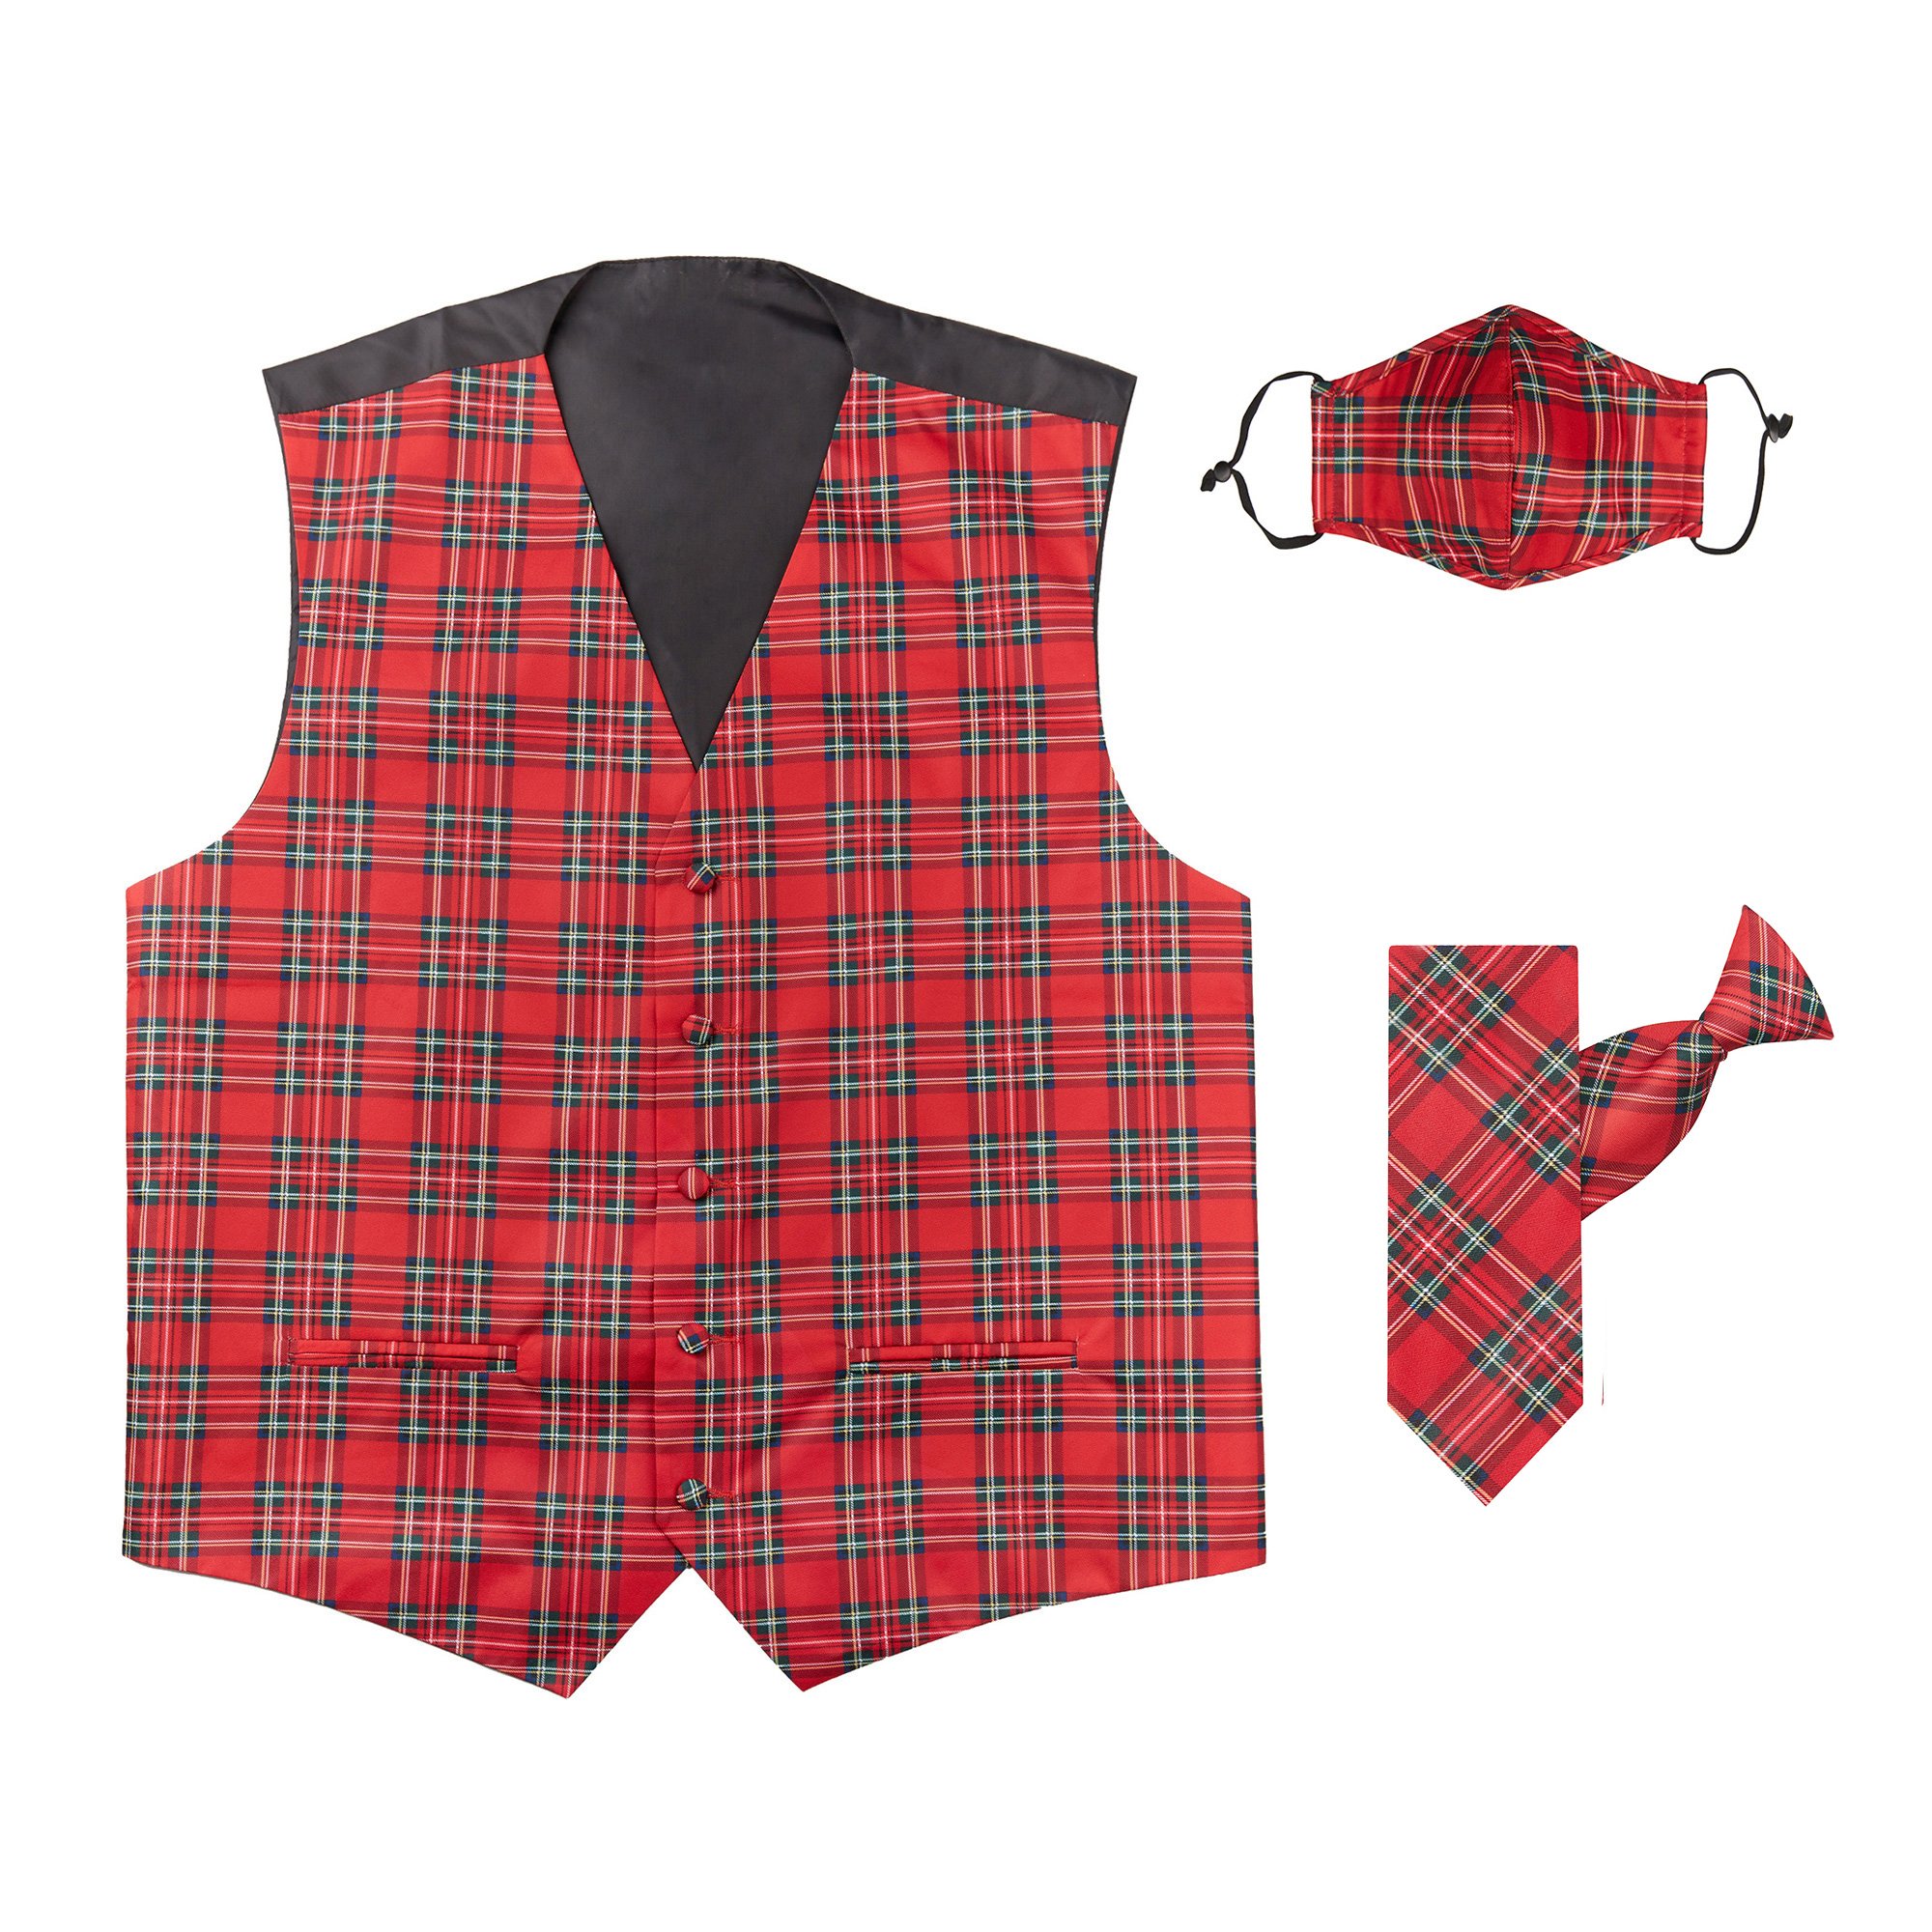 Jacob Alexander Merry Christmas Royal Stewart Red Plaid Men's Vest Clip-On Neck Tie and Adult Face Mask Set - 2XL - image 1 of 8